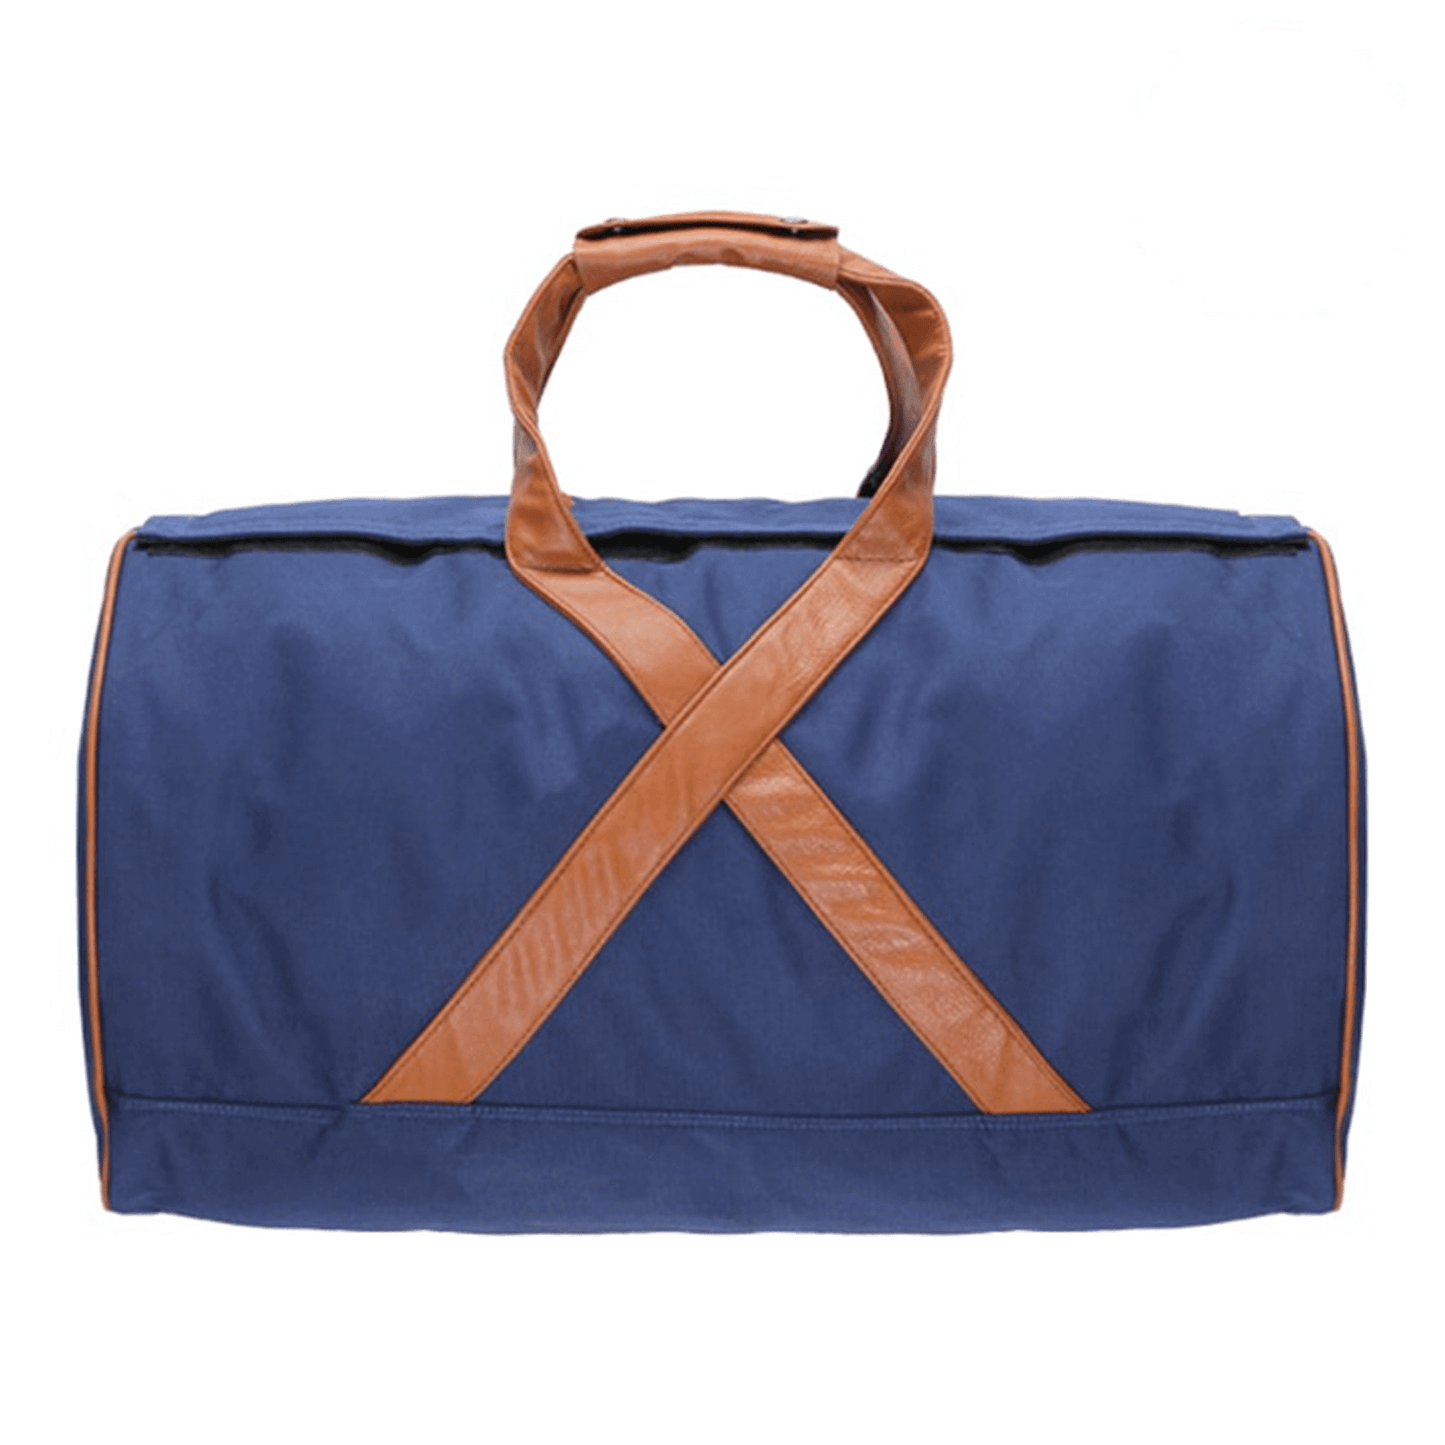 AWOL DAILY Large Blue Duffle Bag 886143 Harvest & Extraction 853336007867